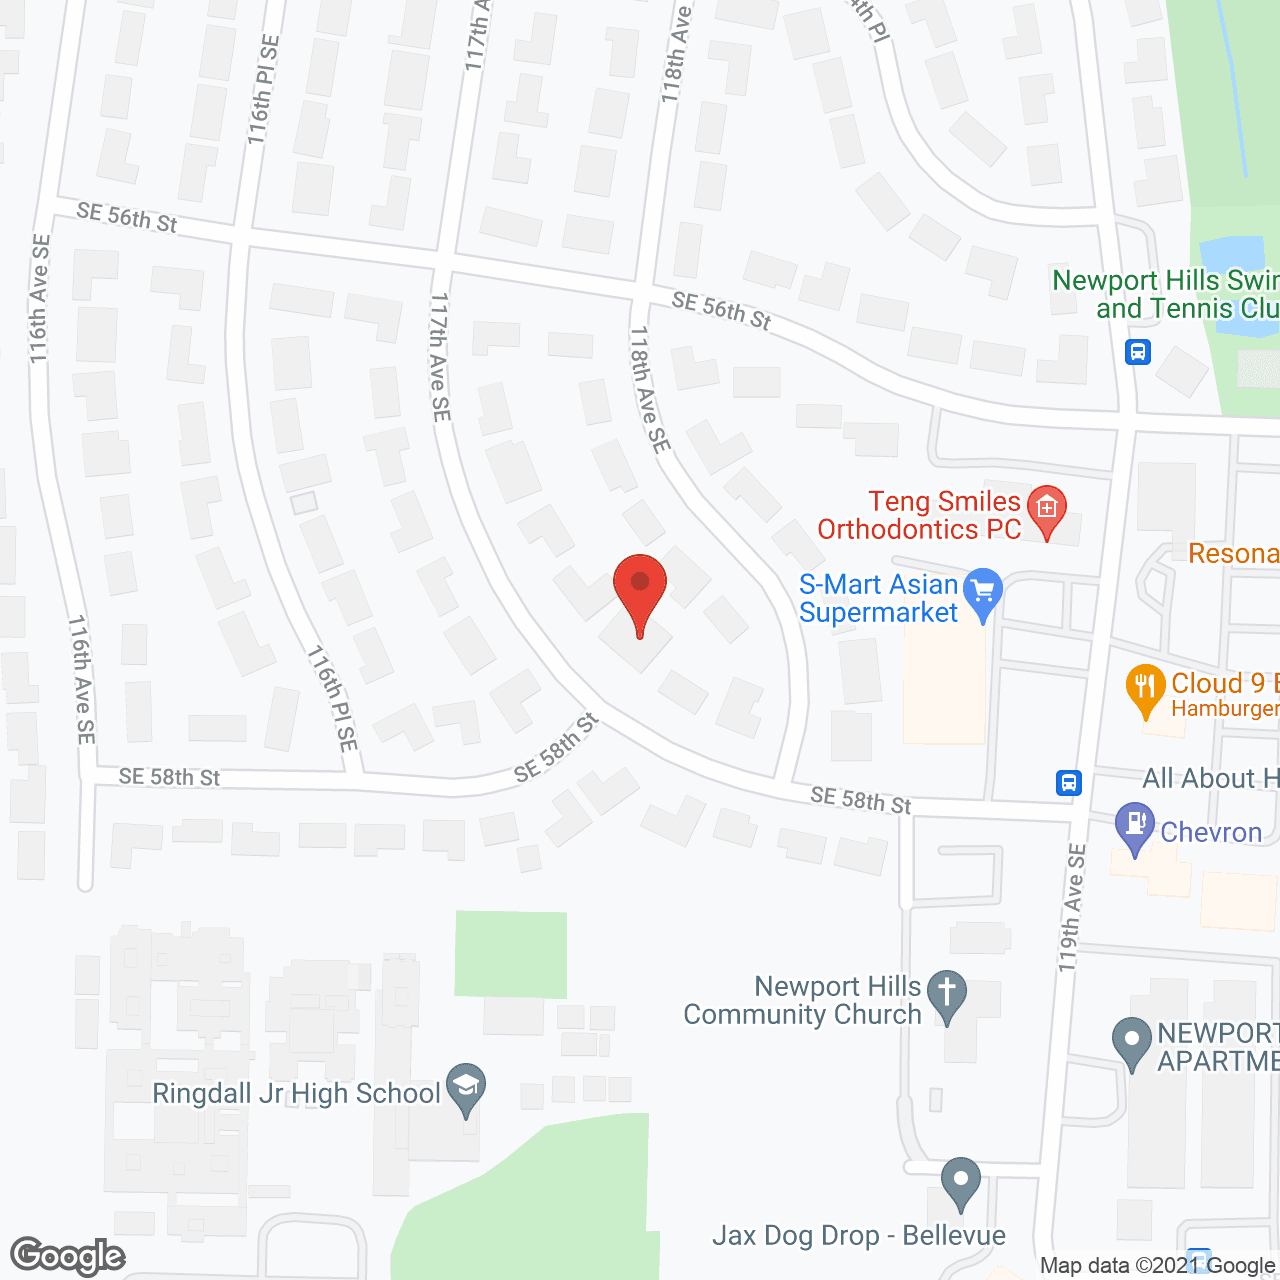 Newport Hills Home Care in google map